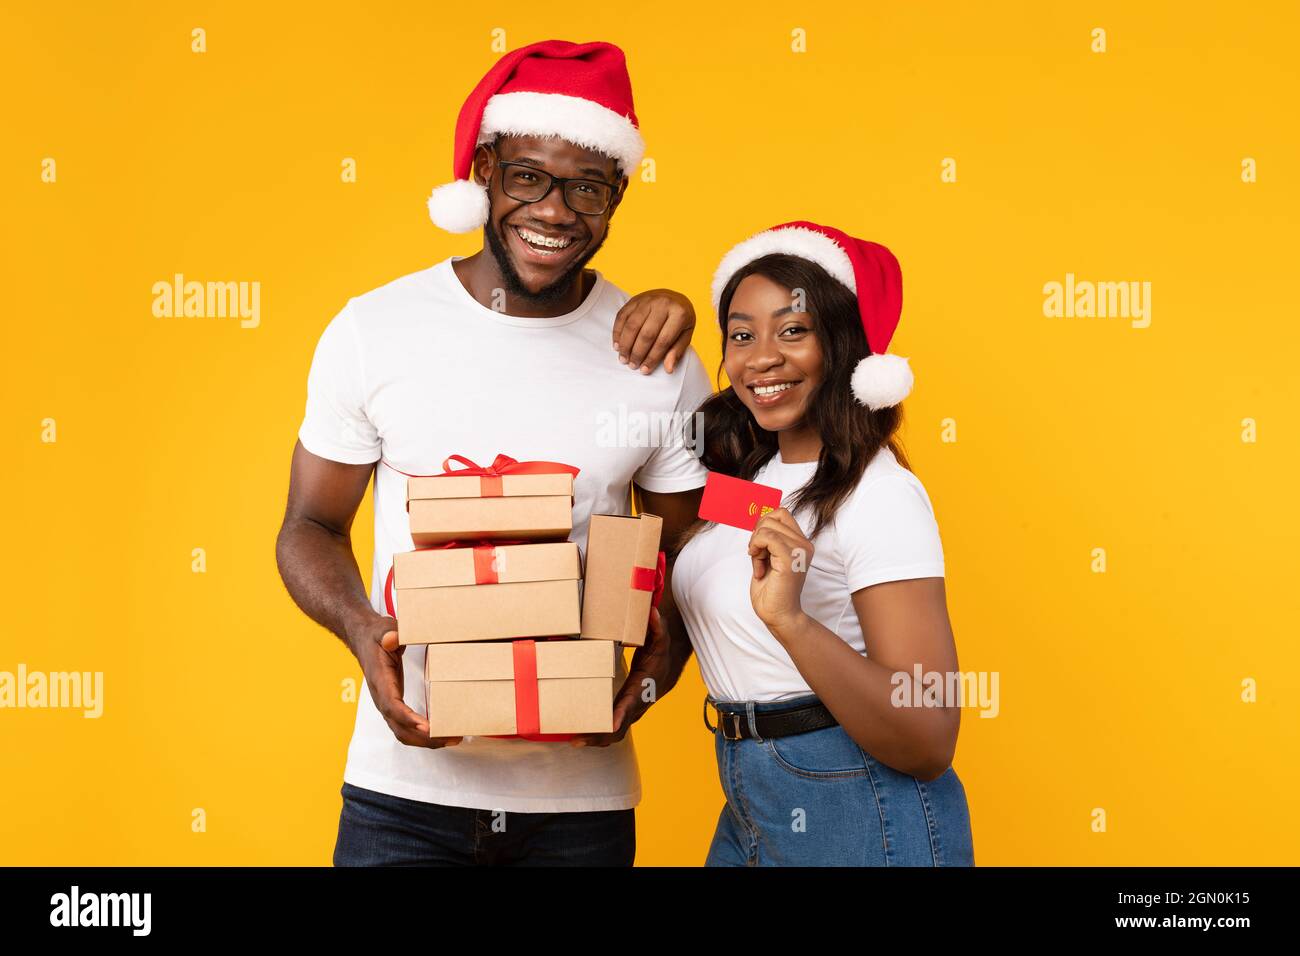 African Couple Holding Credit Card And Christmas Gifts, Yellow Background Stock Photo